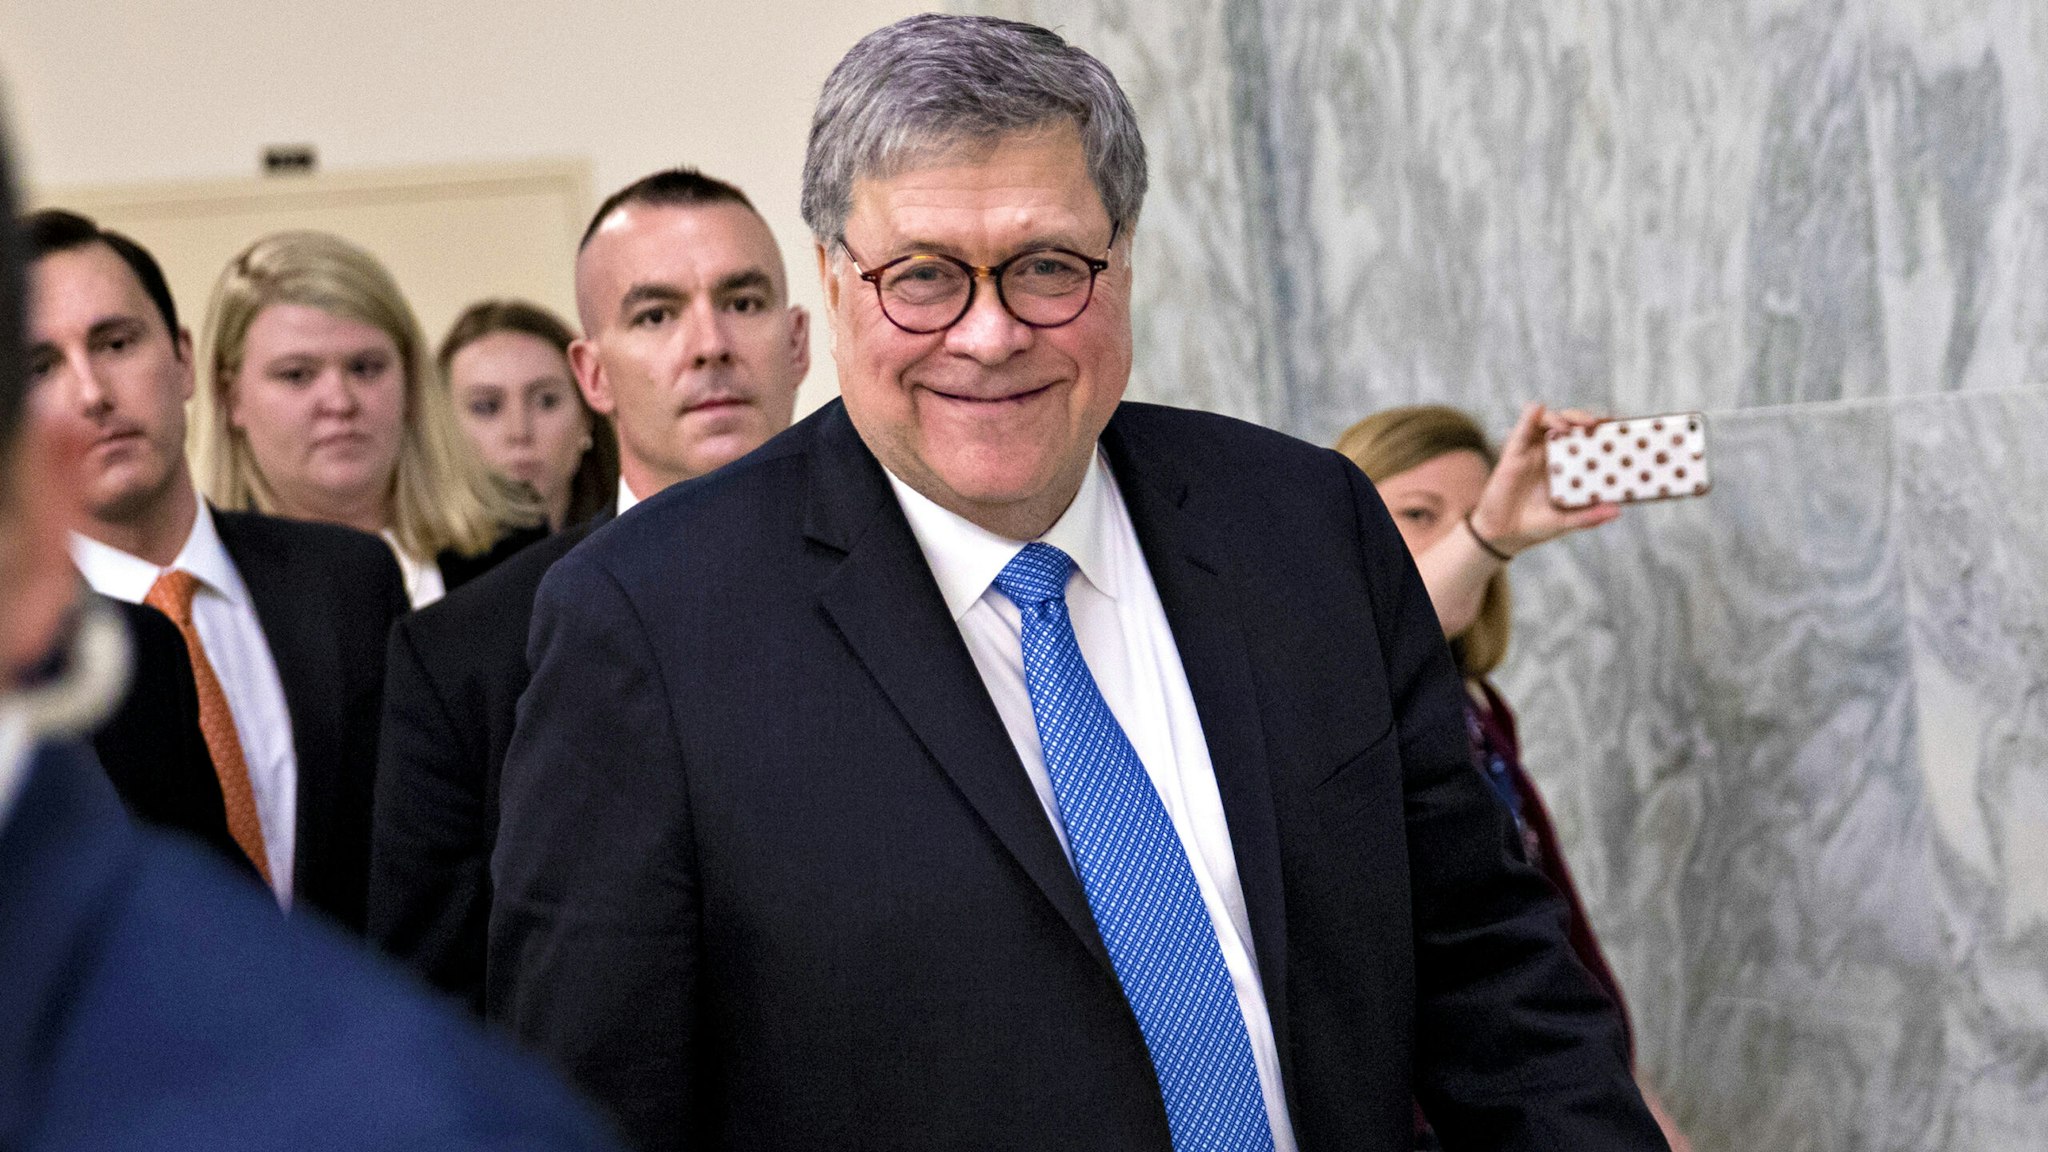 FILE: William Barr, U.S. attorney general, exits after a House Appropriations Subcommittee hearing in Washington, D.C., U.S., on Tuesday, April 9, 2019. Monday, January 20, 2020, marks the third anniversary of U.S. President Donald Trump's inauguration. Our editors select the best archive images looking back over Trumps term in office.